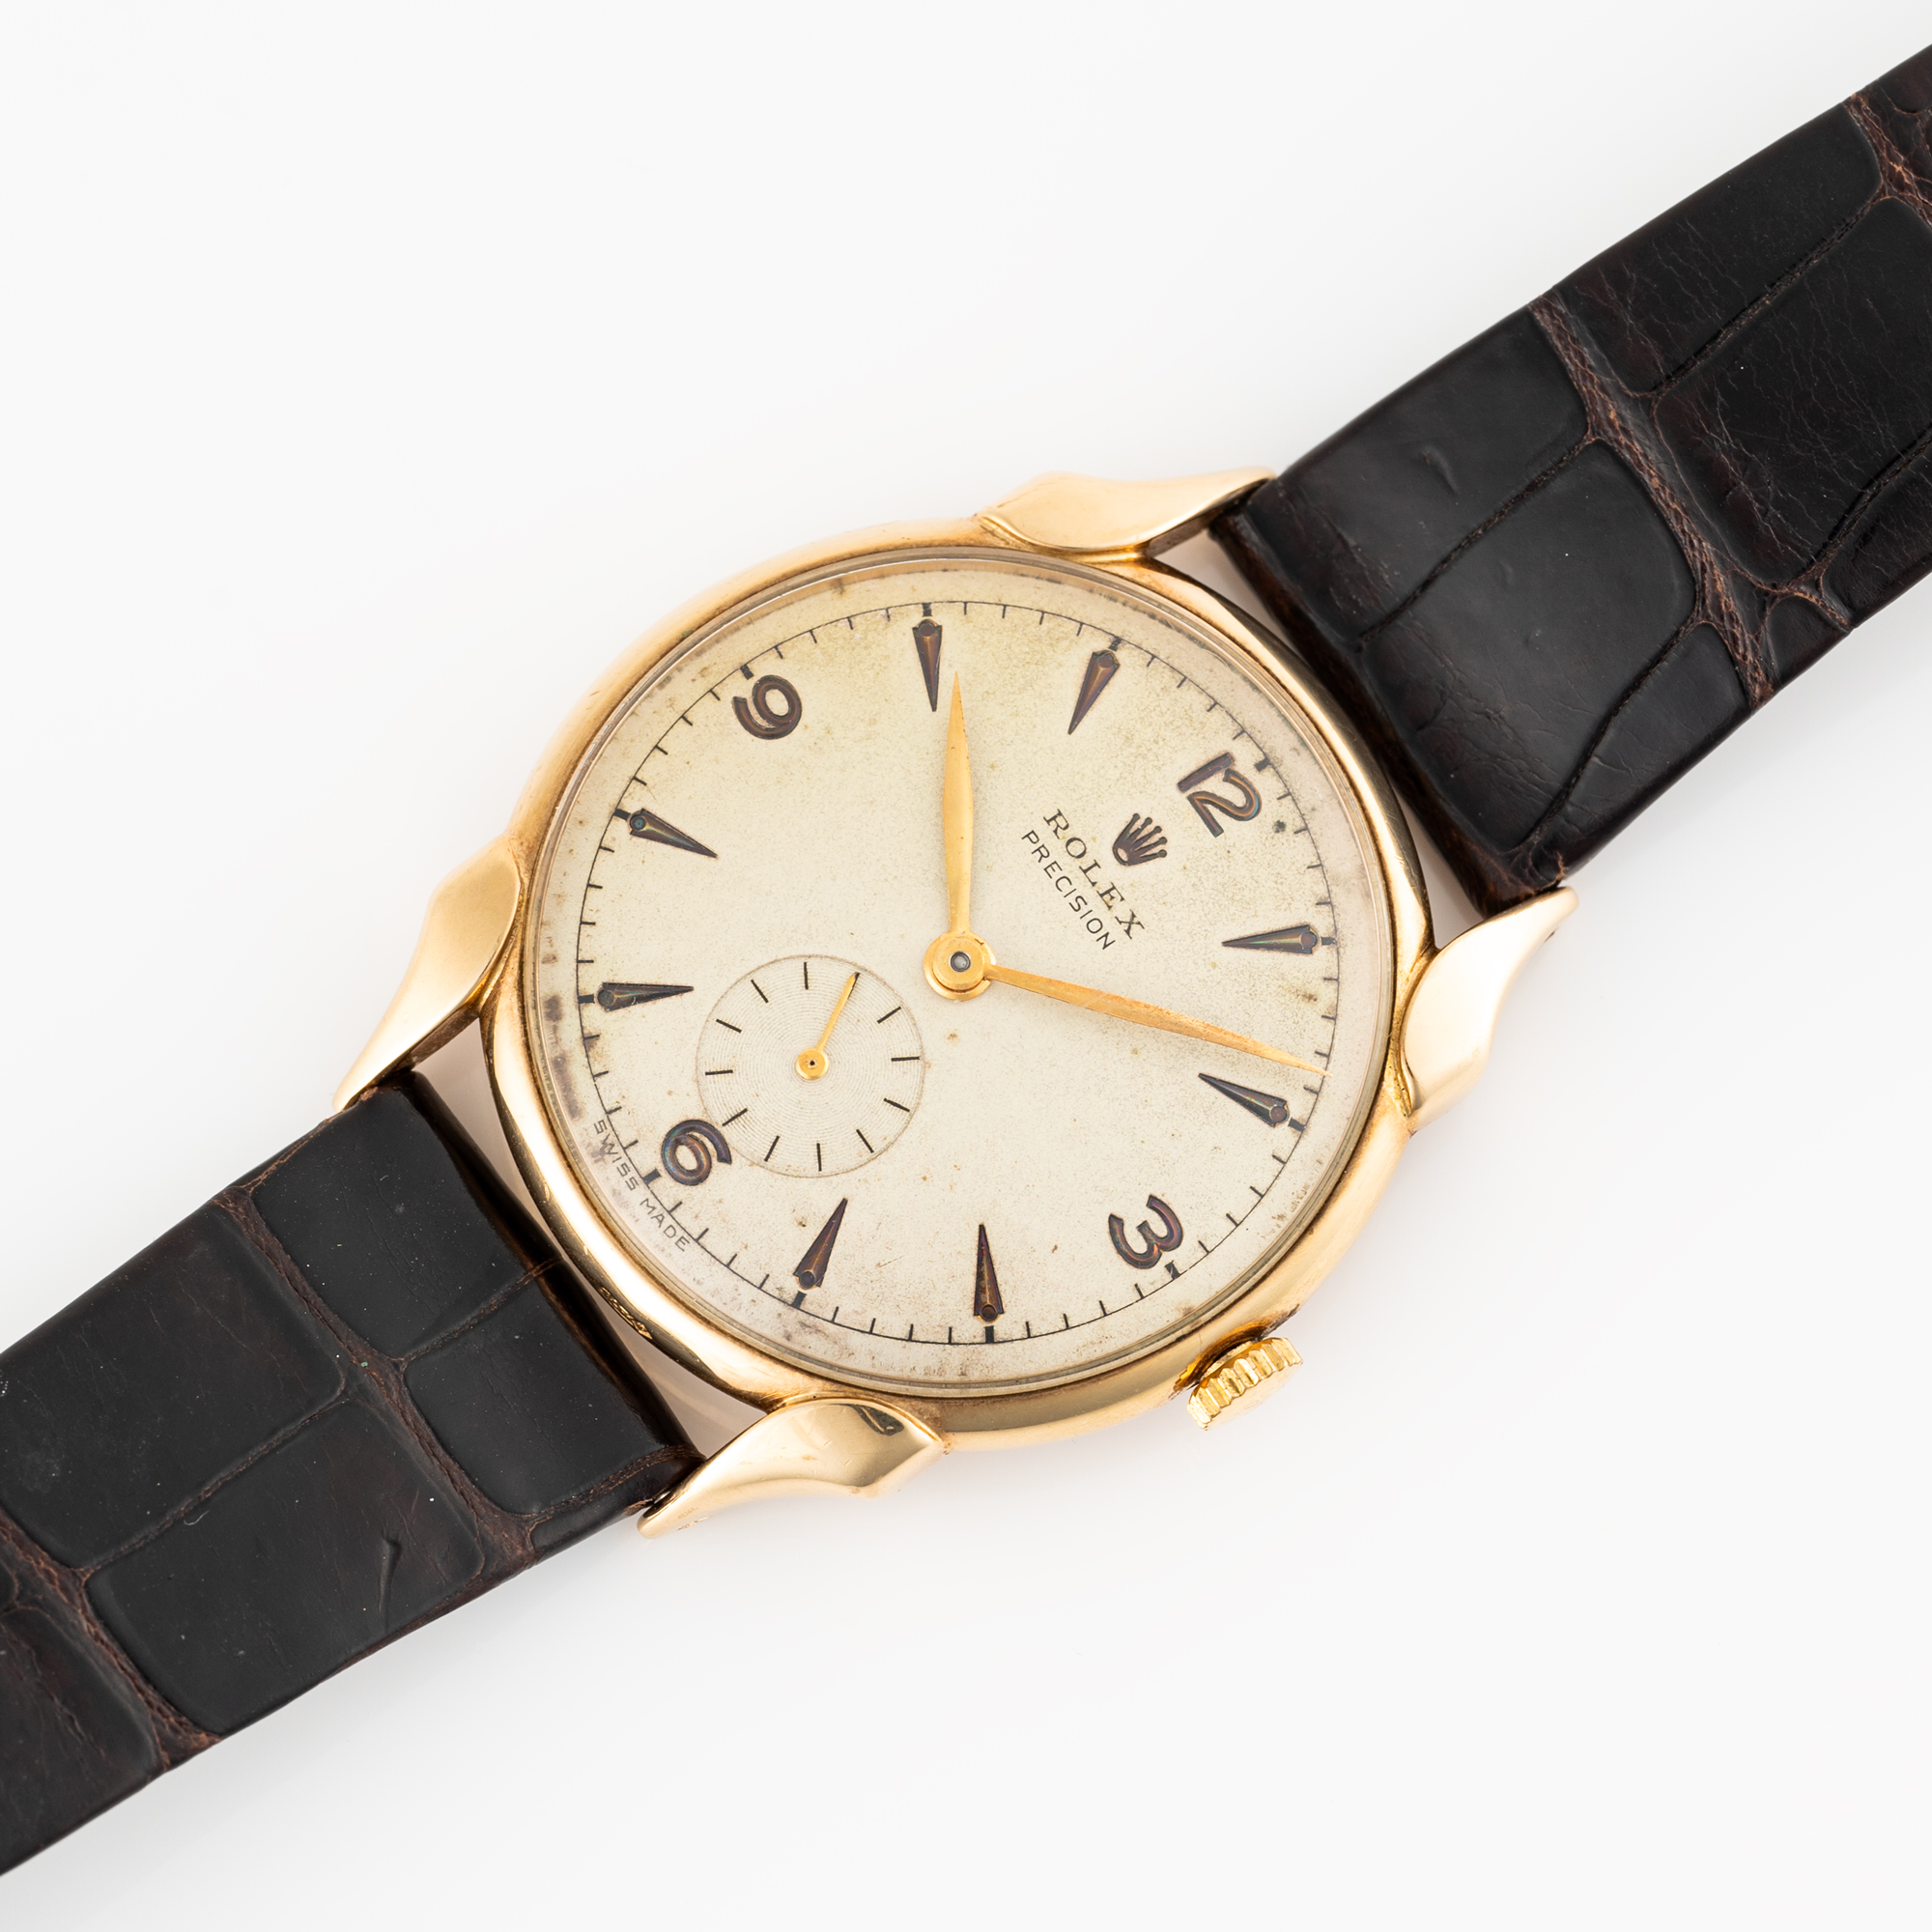 A RARE GENTLEMAN'S SIZE 9CT SOLID GOLD ROLEX PRECISION WRIST WATCH CIRCA 1950s, WITH SCALLOPED - Image 4 of 9